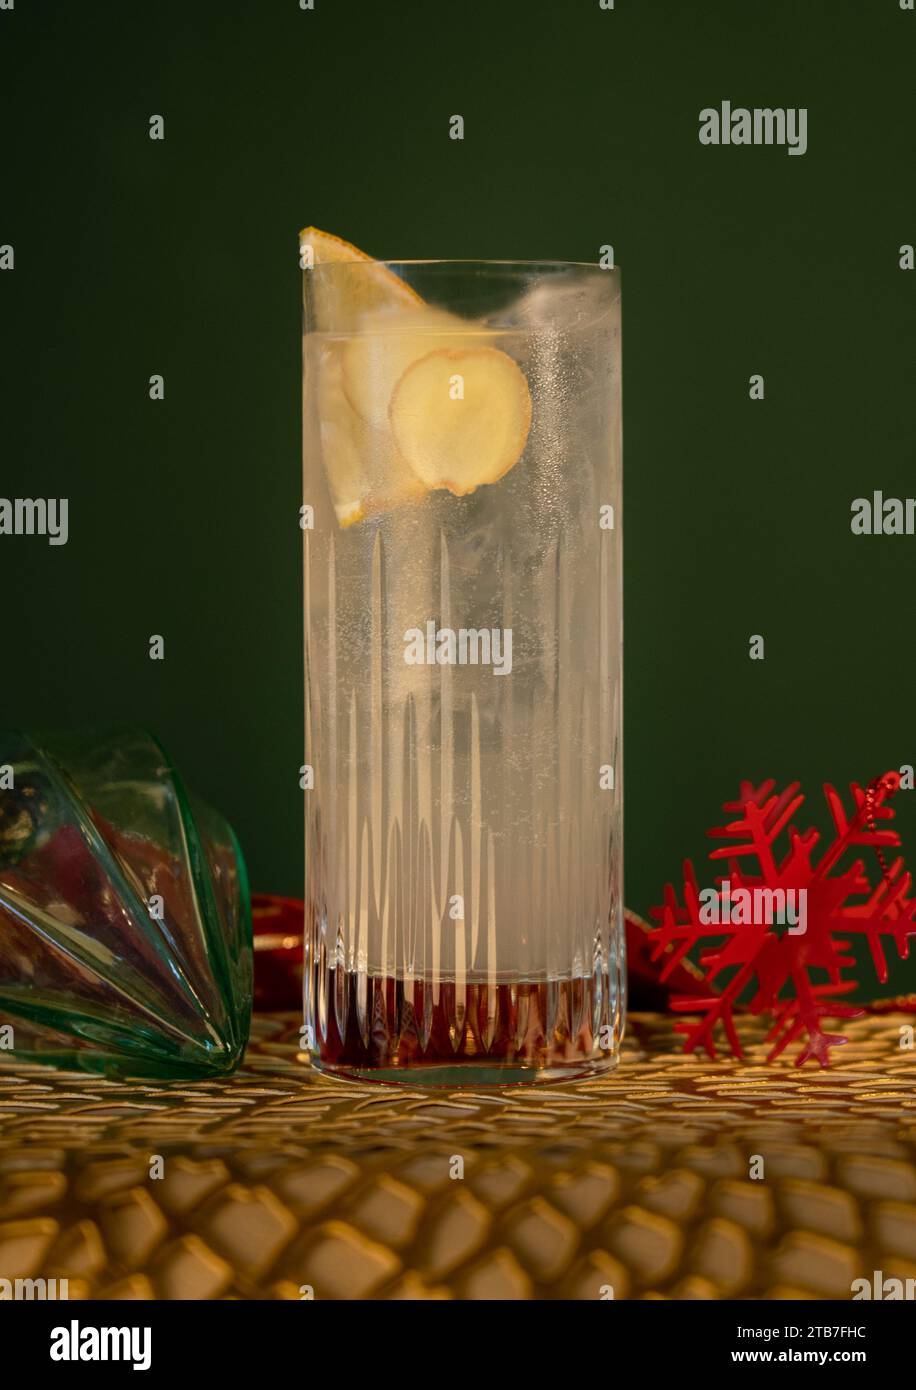 Gin and tonic in high ball glass with lemon and ice with glass bauble decorations in front of green background Stock Photo